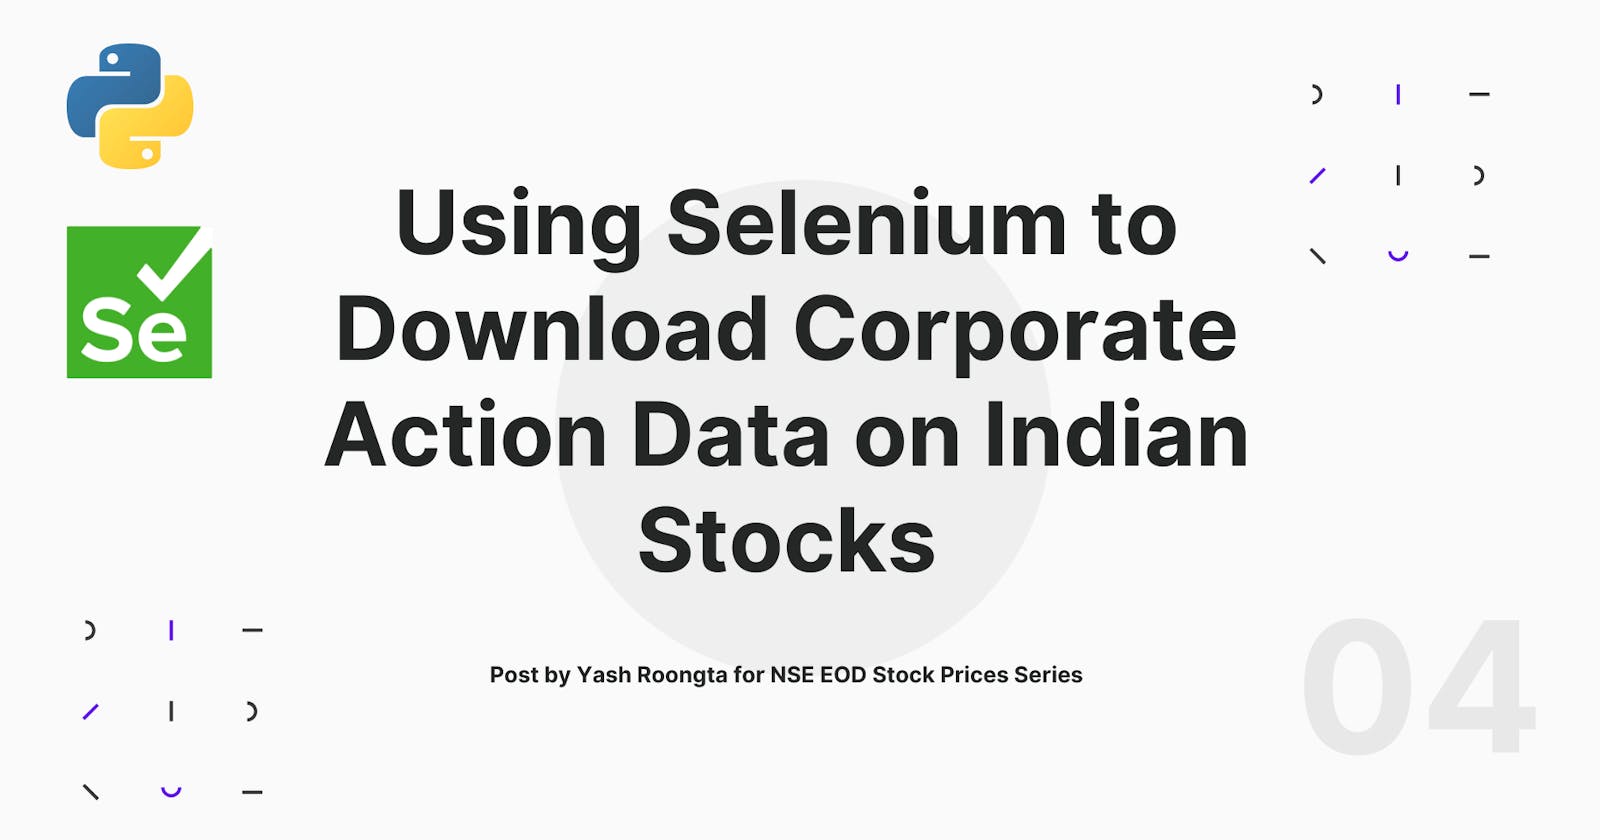 Using Selenium to Download Corporate Action Data on Indian Stocks